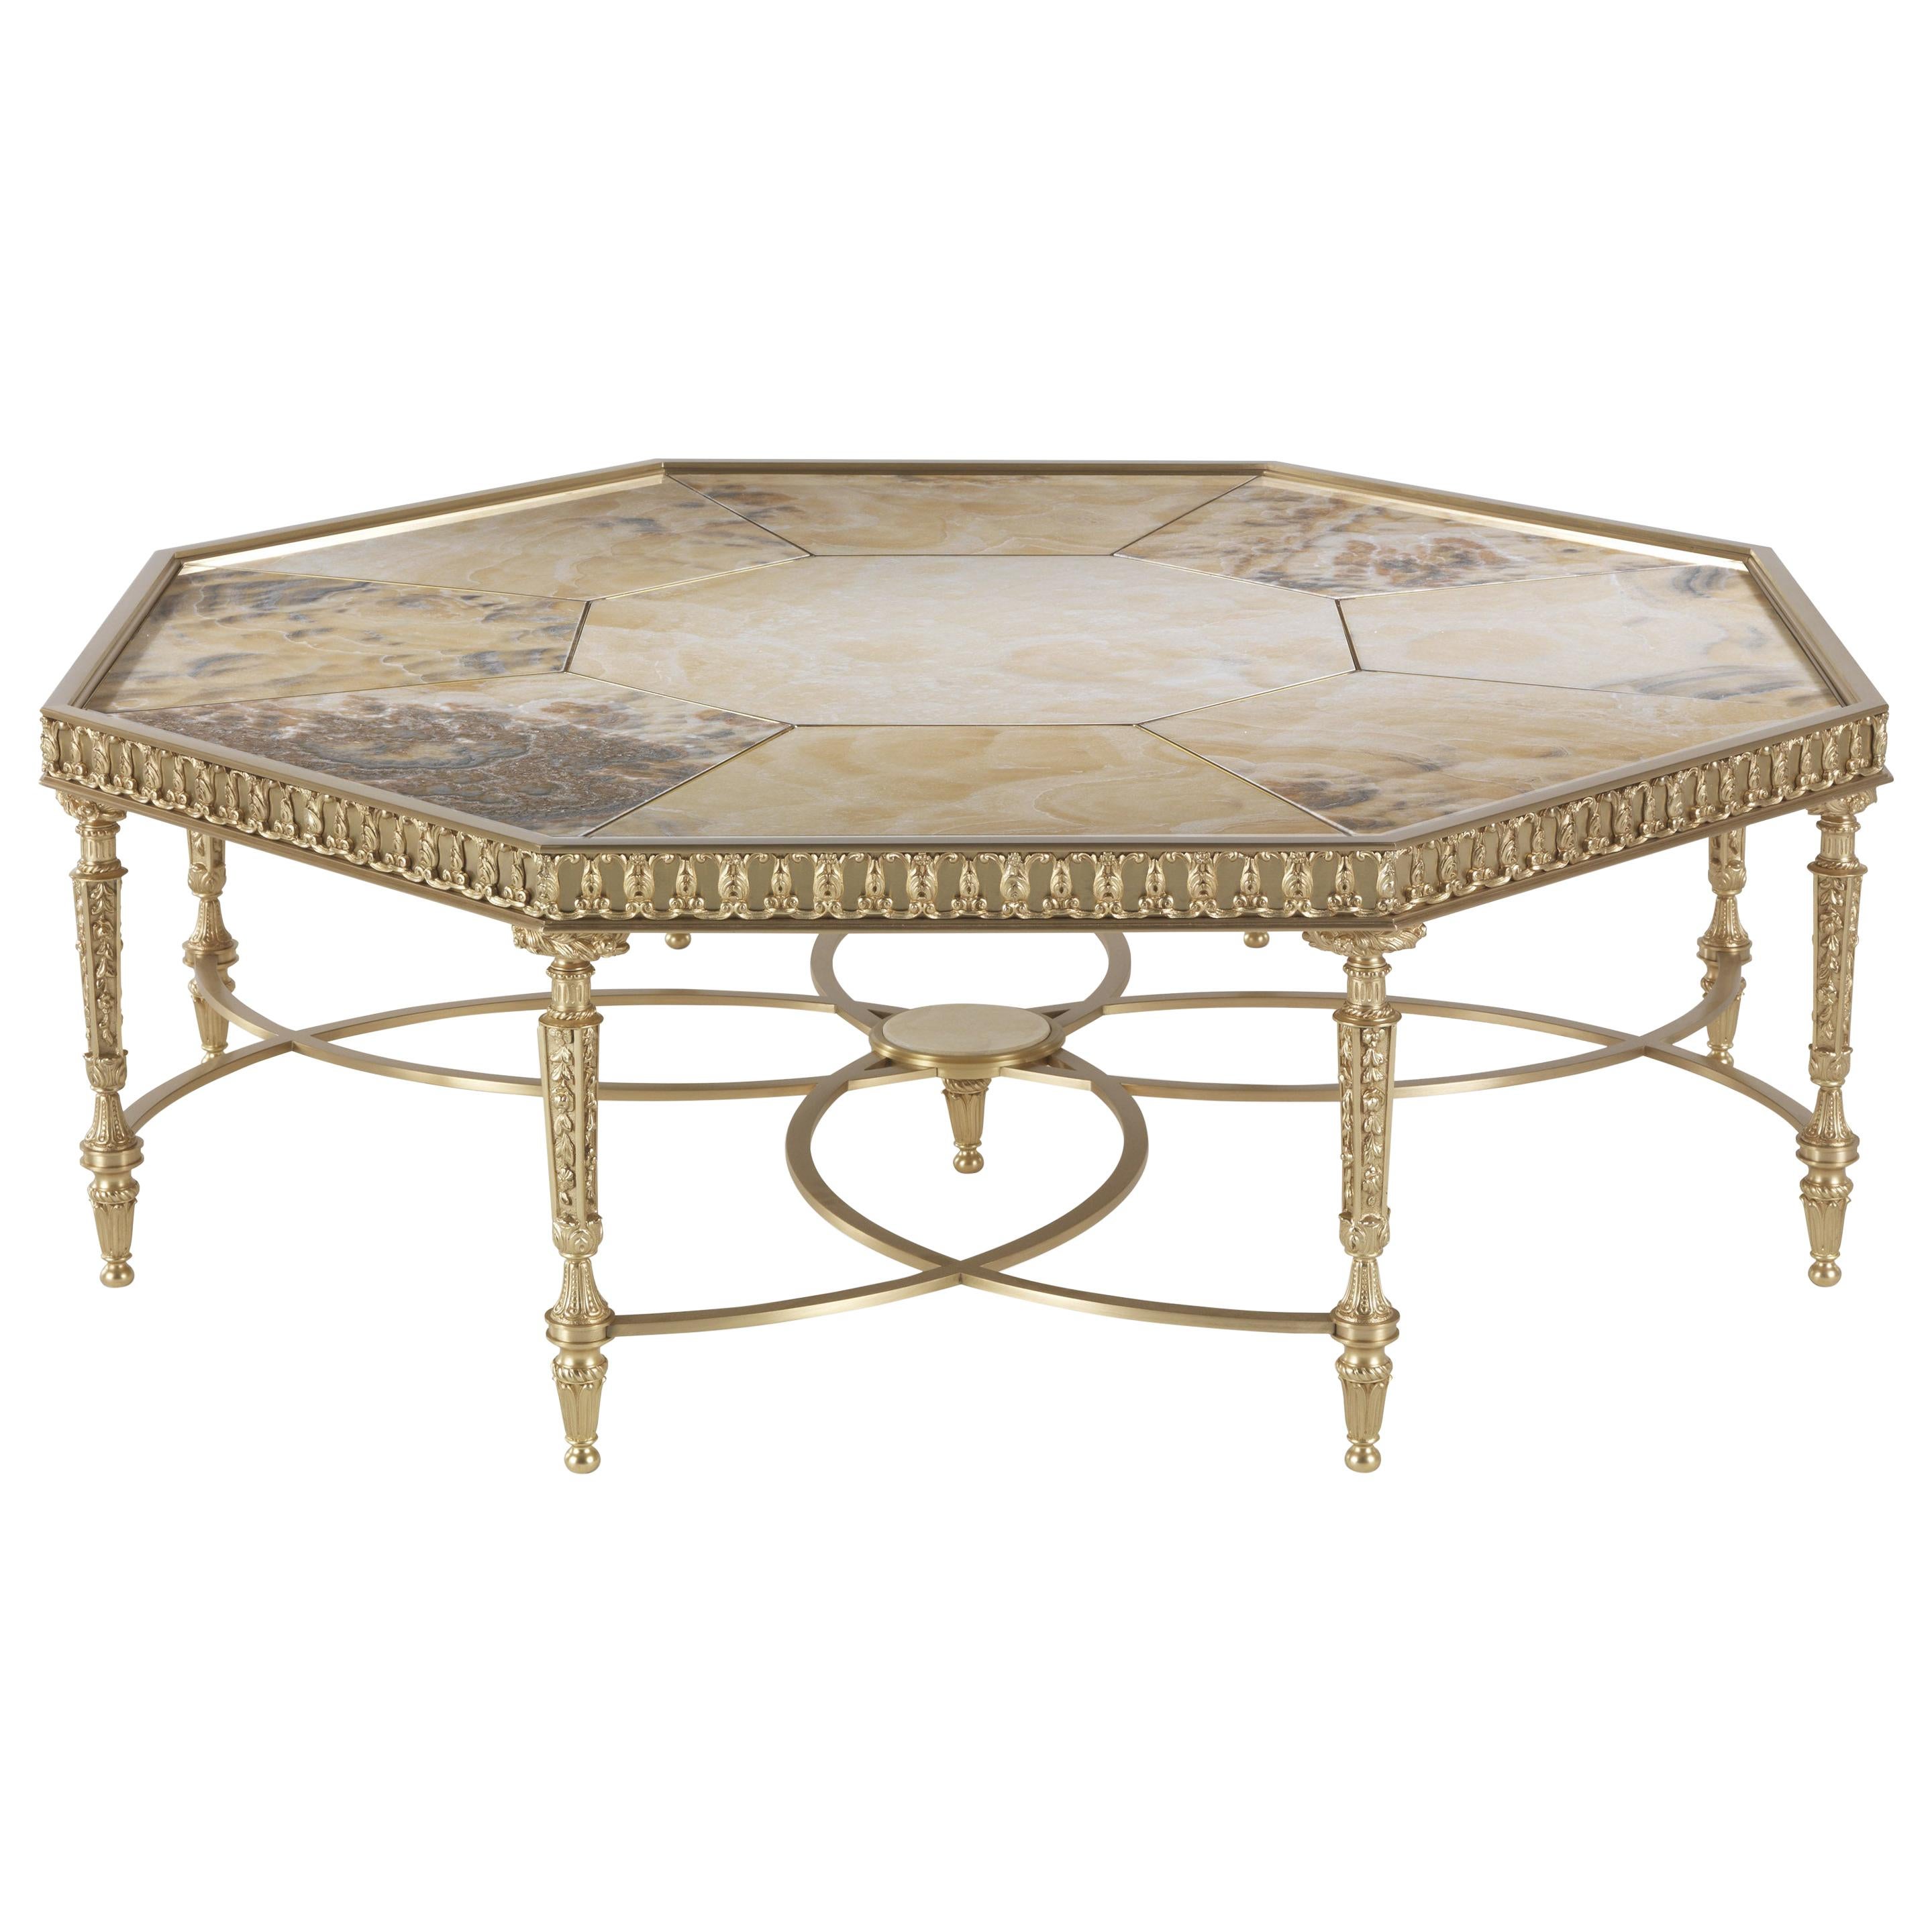 21st Century Lumiere Central Table in Lost-wax Cast Brass and Cloudy Onyx Top For Sale